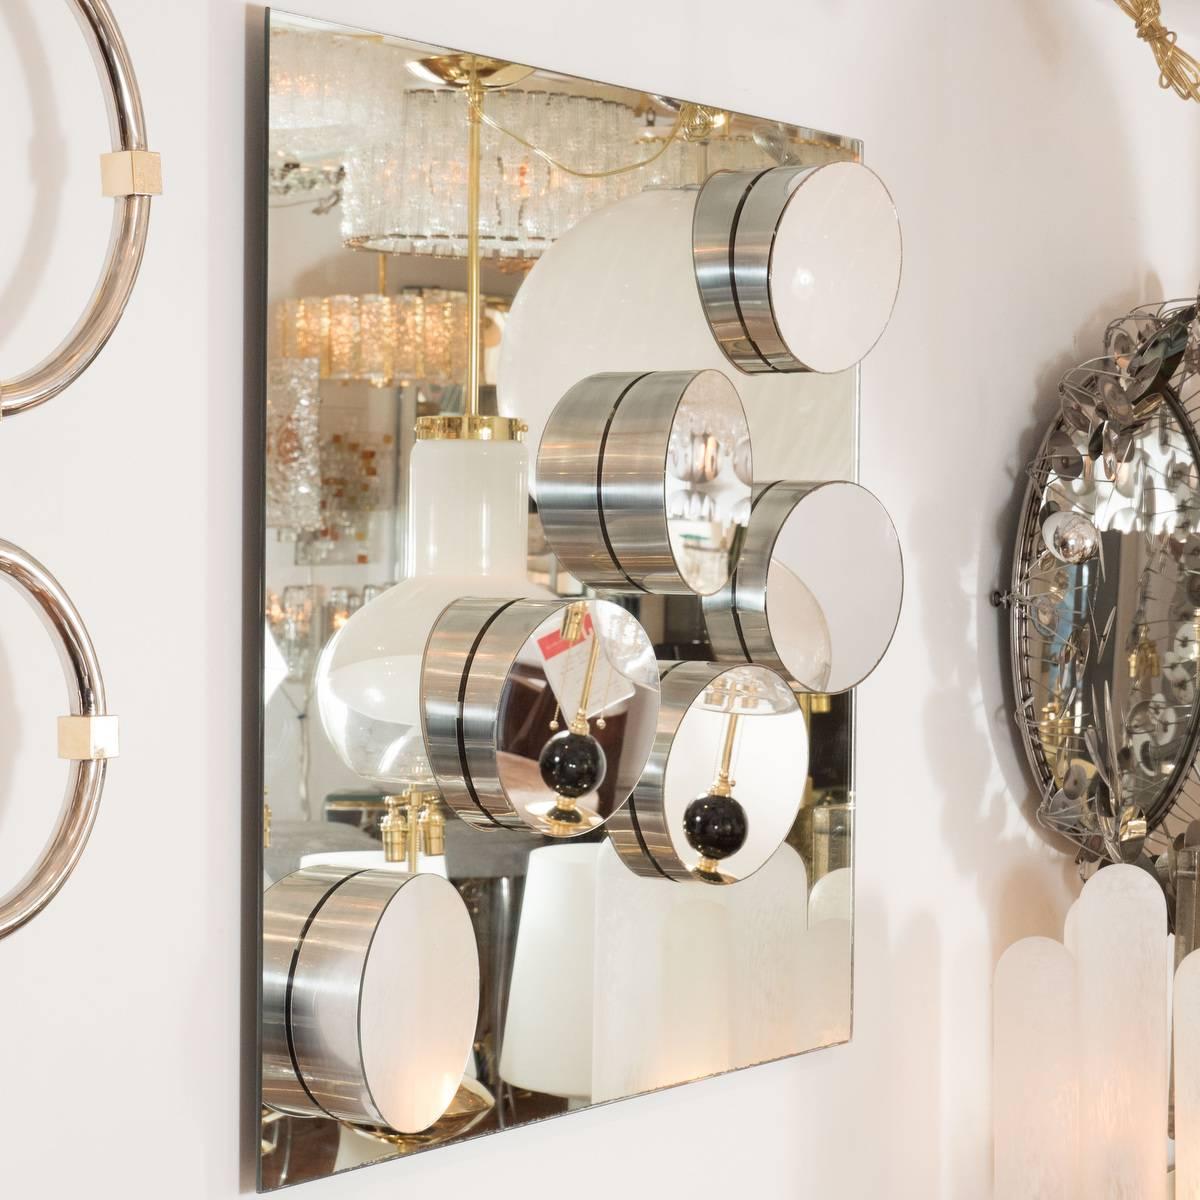 Decorative mirror with applied, sloped details featuring stainless steel frames.